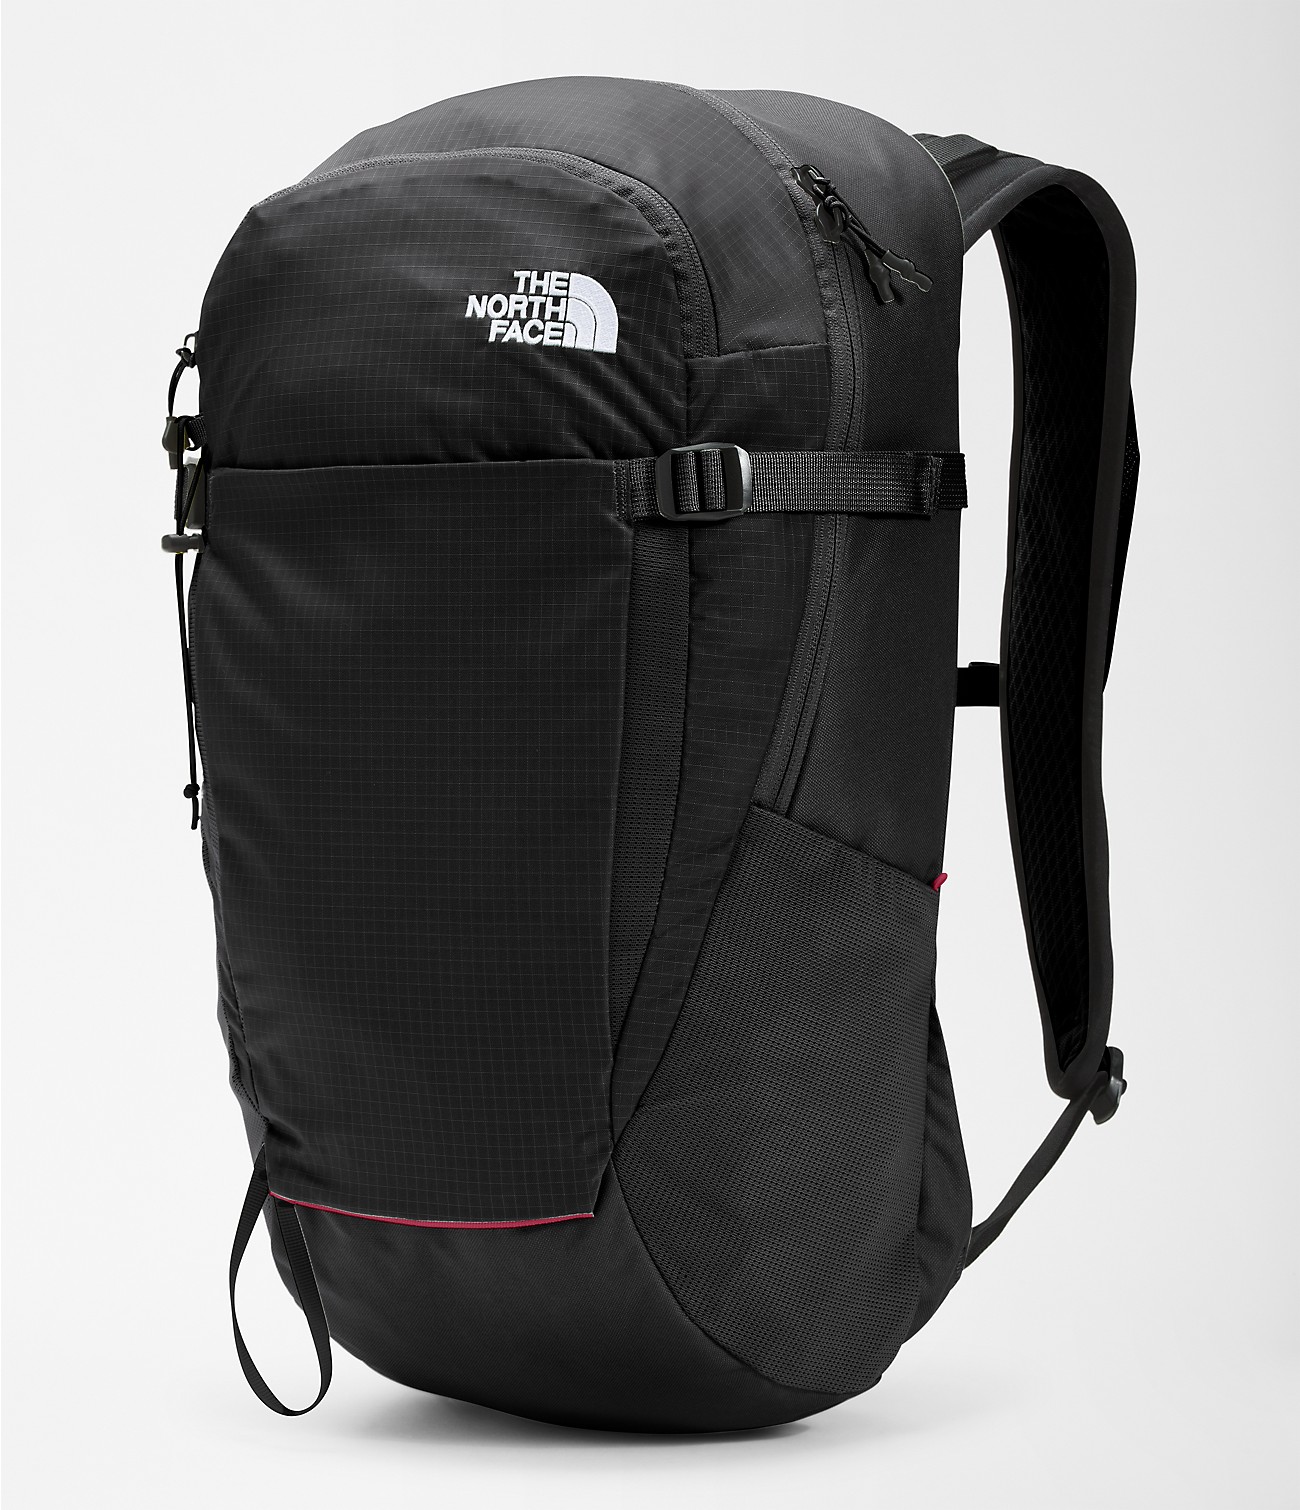 Unlock Wilderness' choice in the Deuter Vs North Face comparison, the Basin 24 Backpack by The North Face